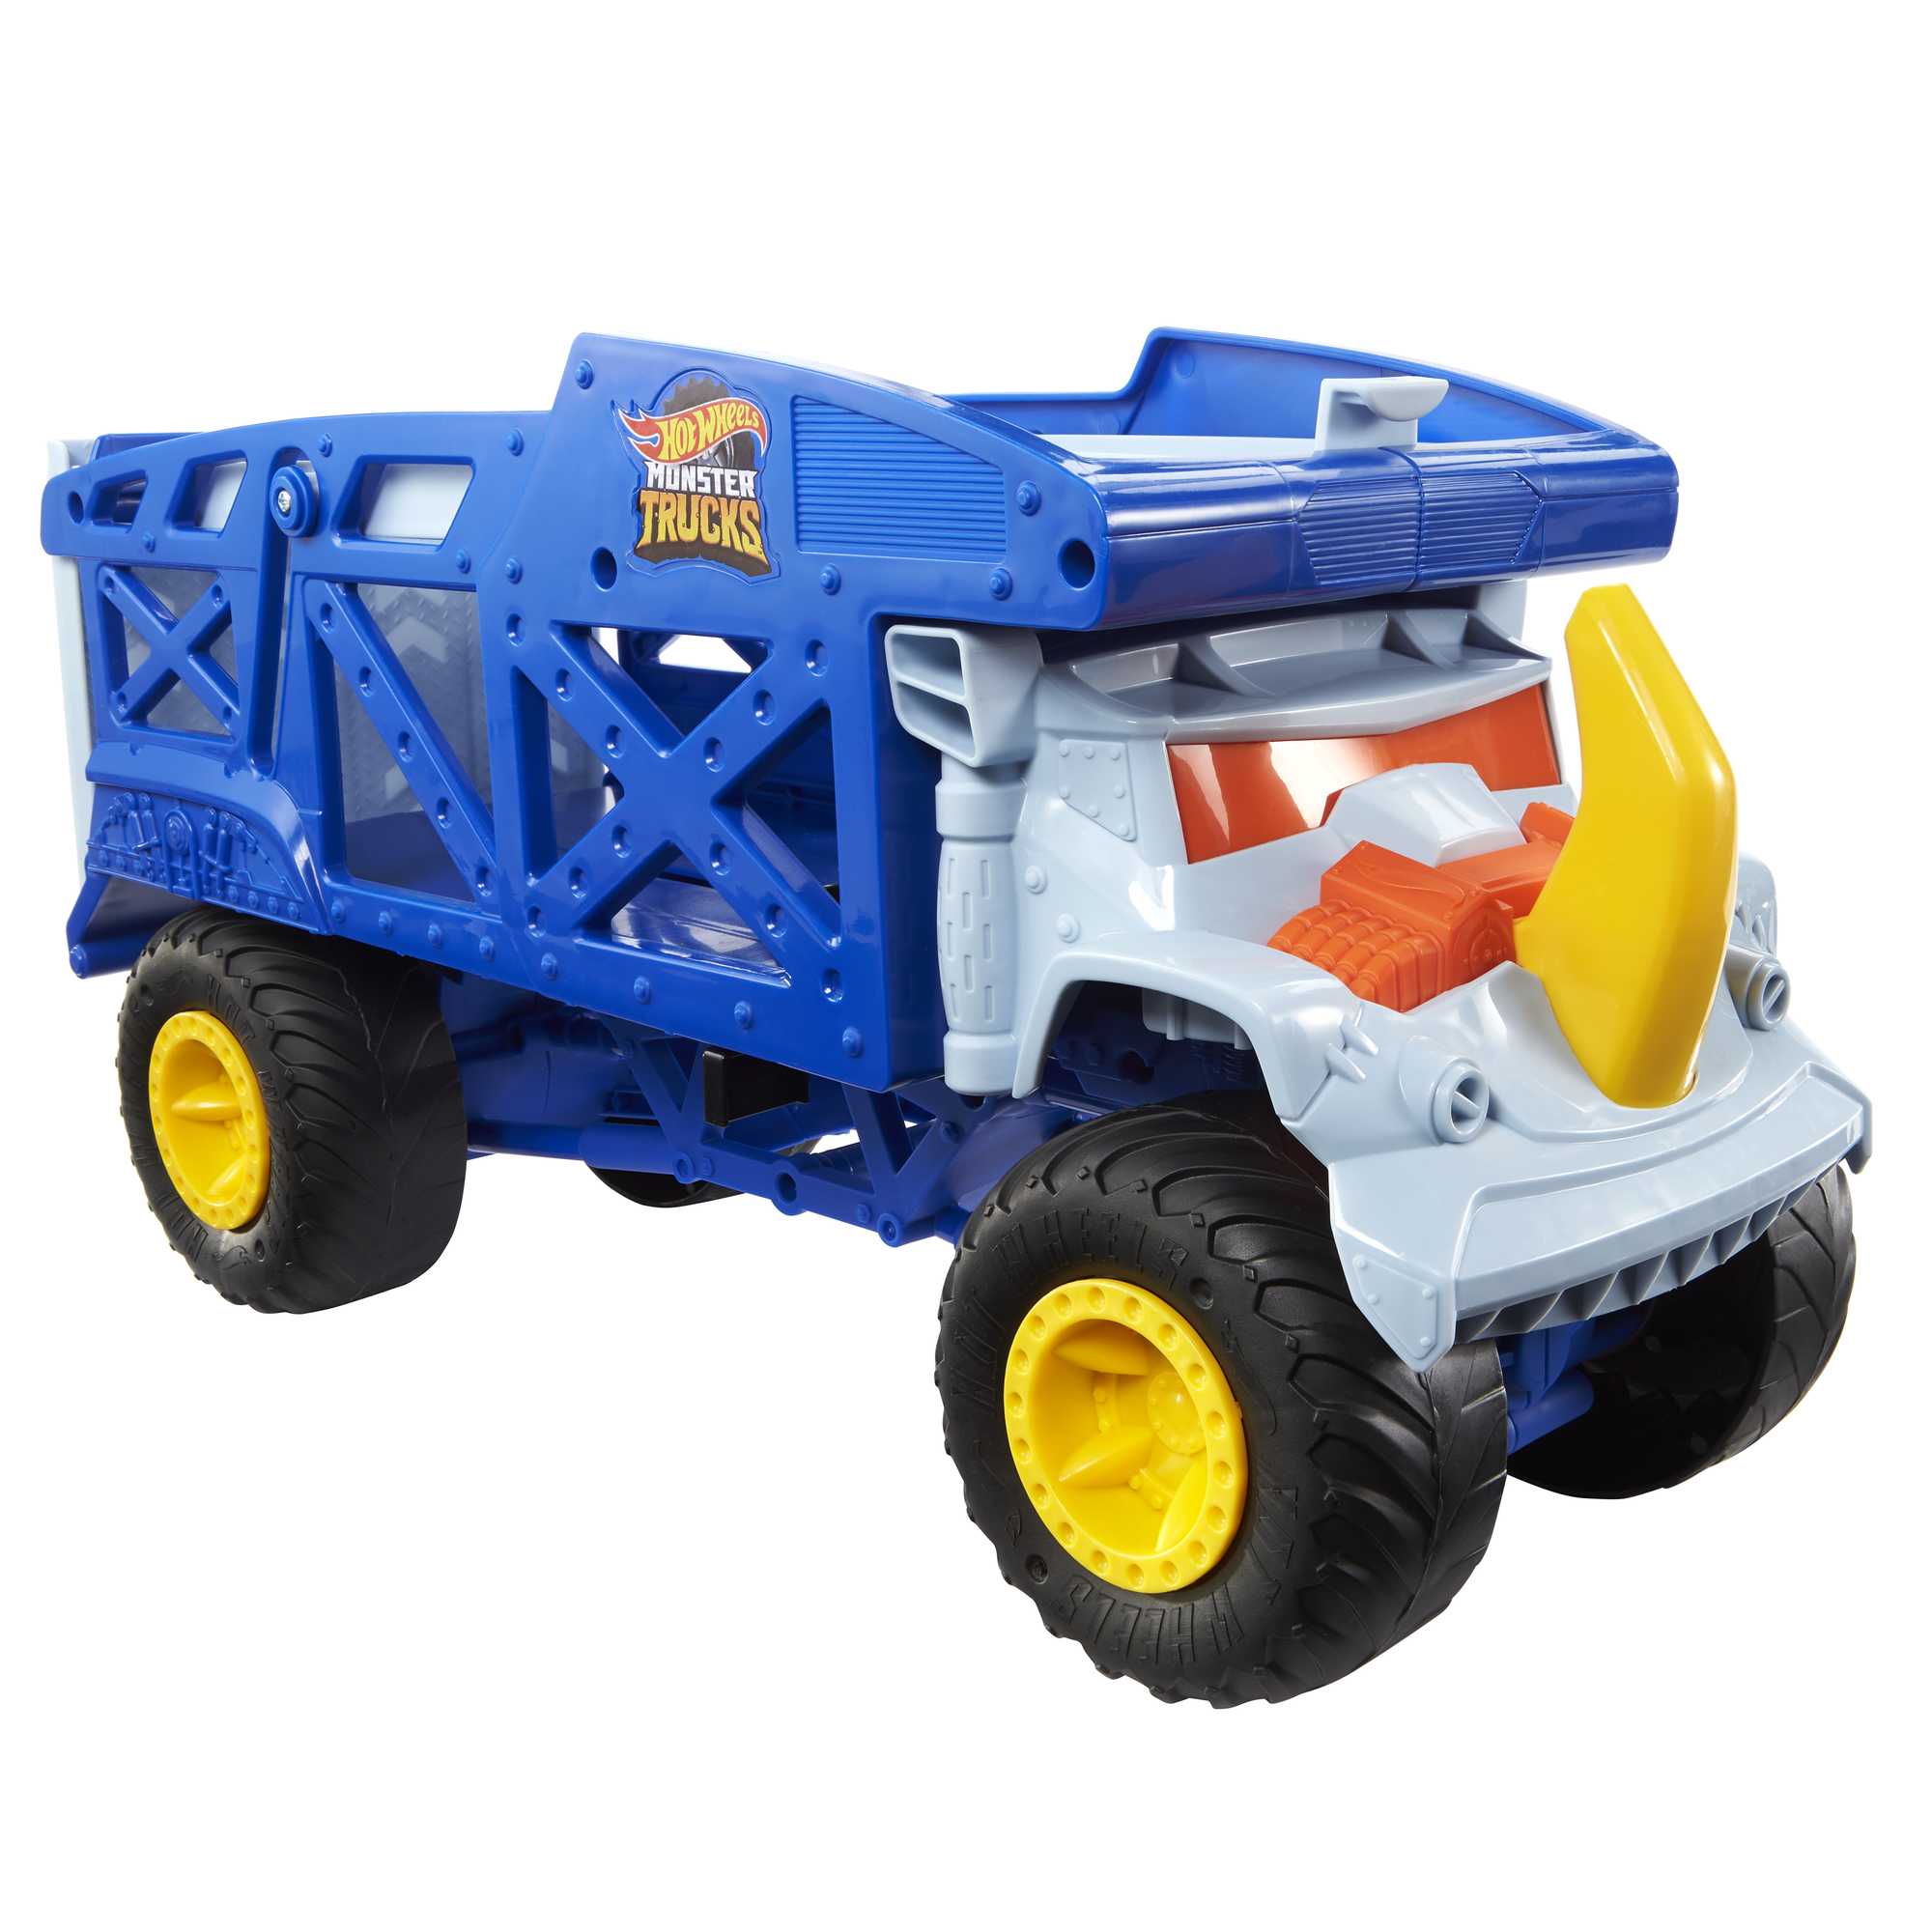  Hot Wheels Monster Truck 1:24 Scale 2022 Bone Shaker It All  Vehicle with Giant Wheels for Kids Age 3 to 8 Years Old Great Gift Toy  Trucks Large Scale : Toys & Games